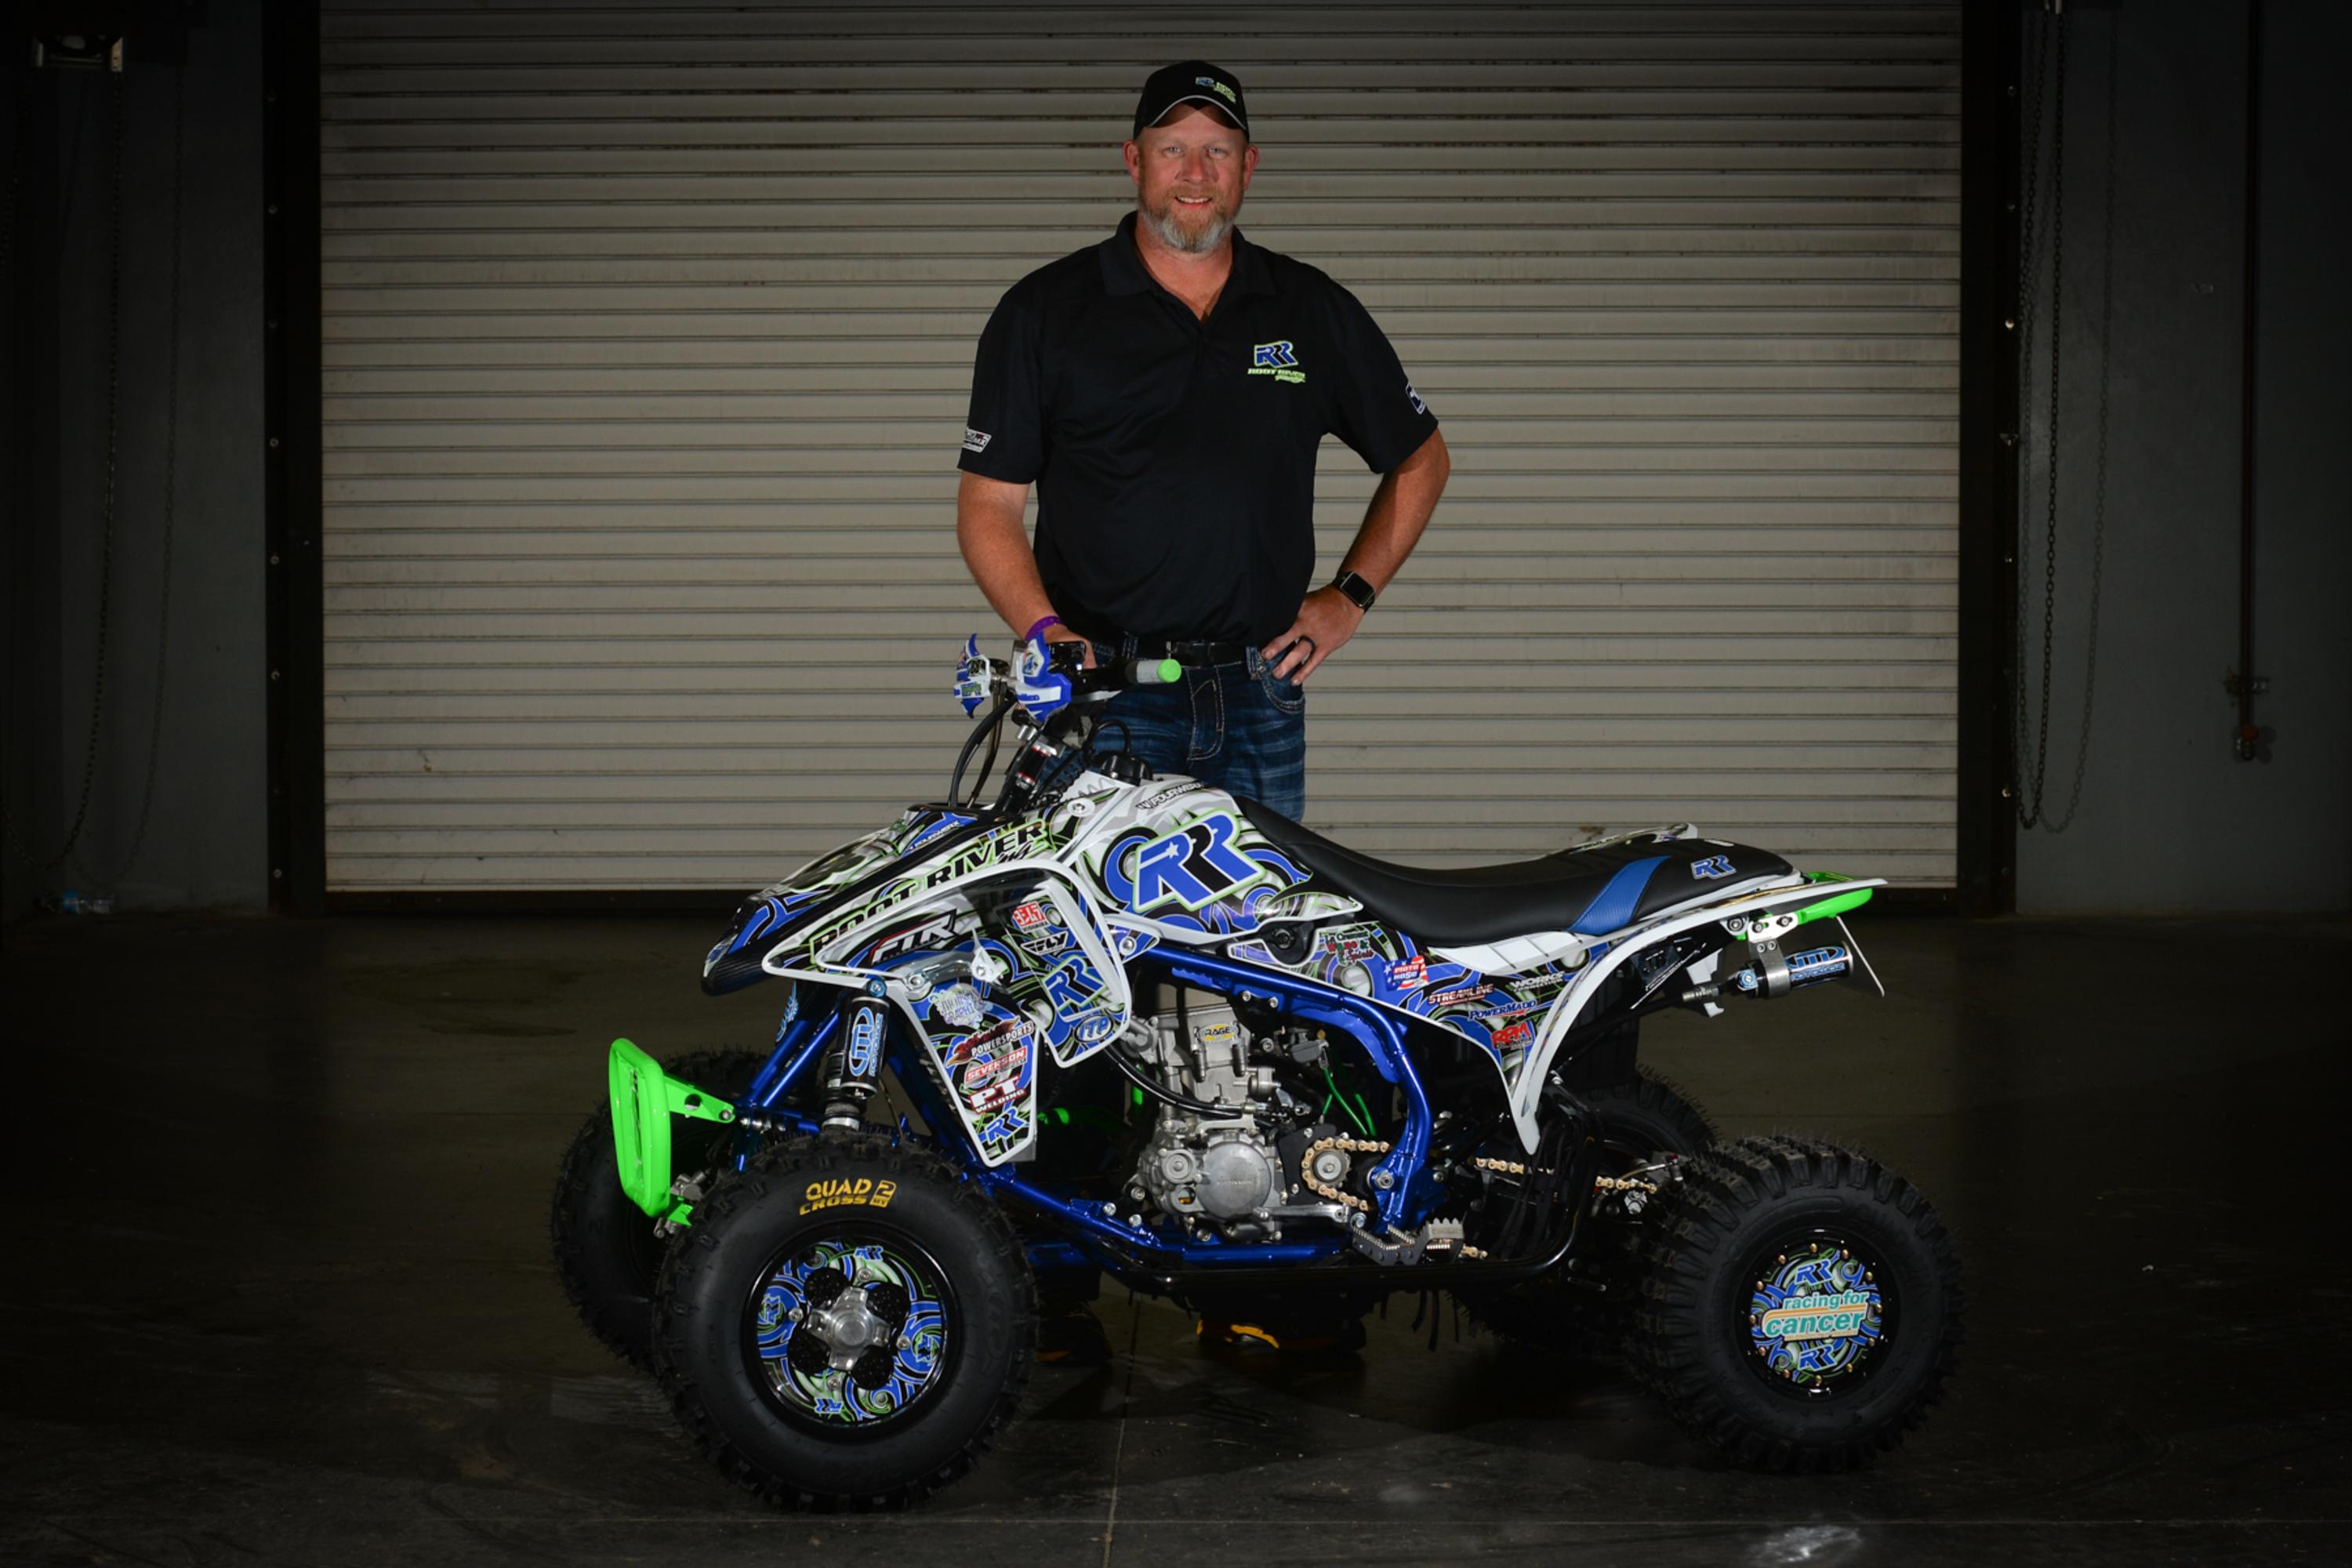 The ATVMX Community Mourns the Loss of ATV Motocross Enthusiast Rich Gillette